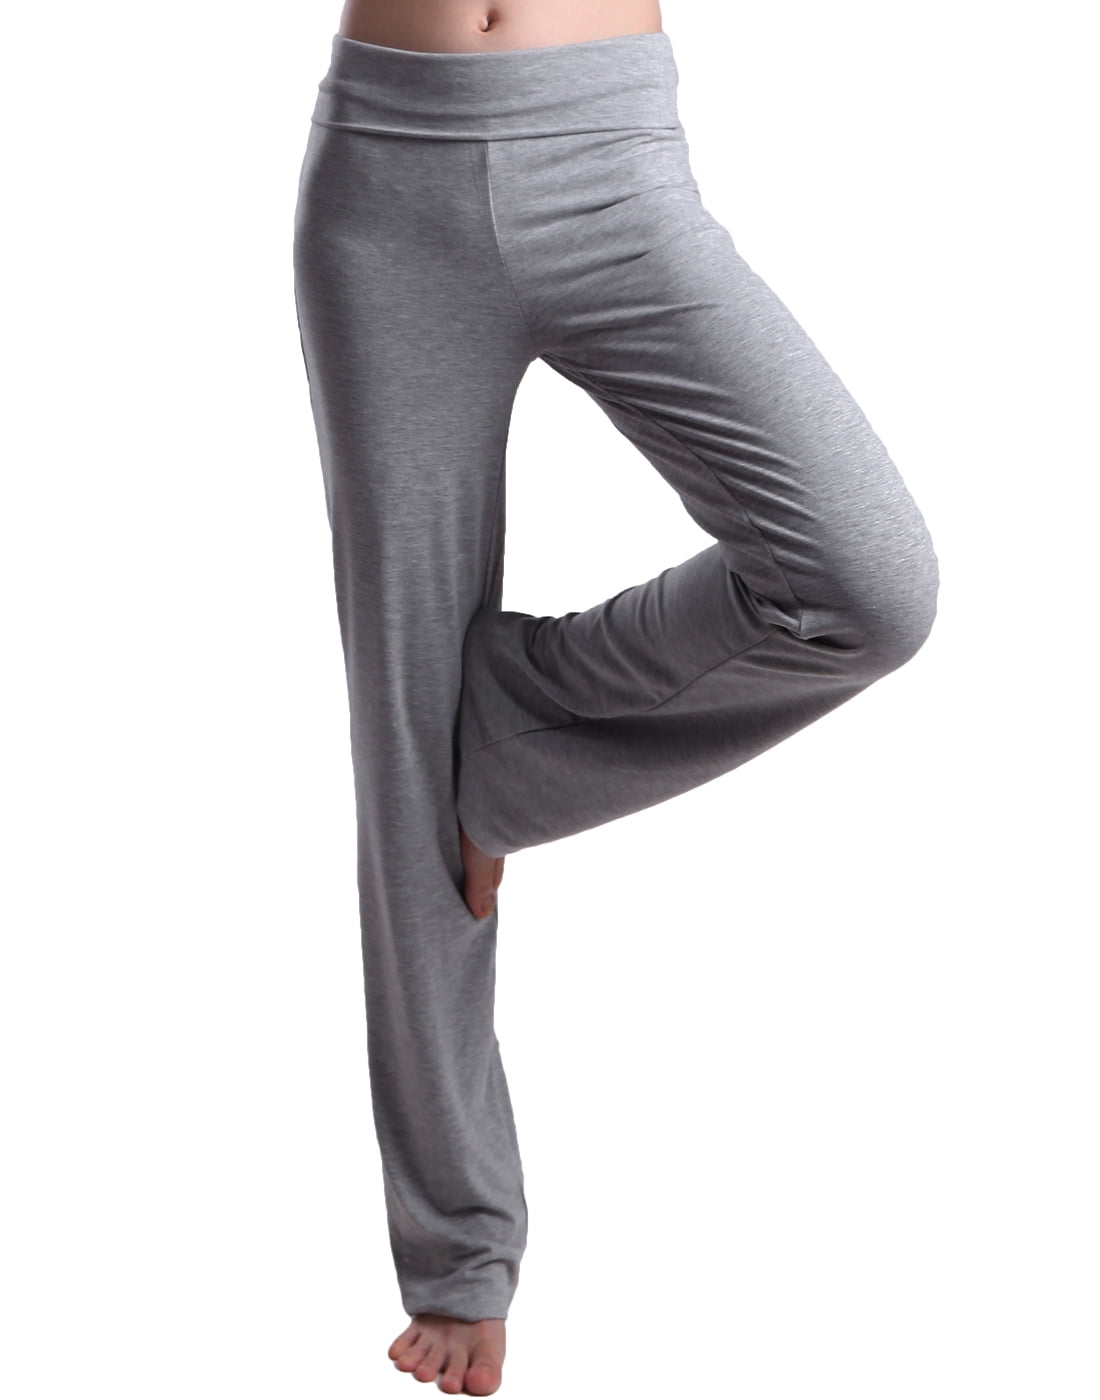 Fold Over Yoga Pants for Women Tapered Leggings Criss Cross Lace-up Bottom  Quick Dry Pockets Comfy Workout Outfits 